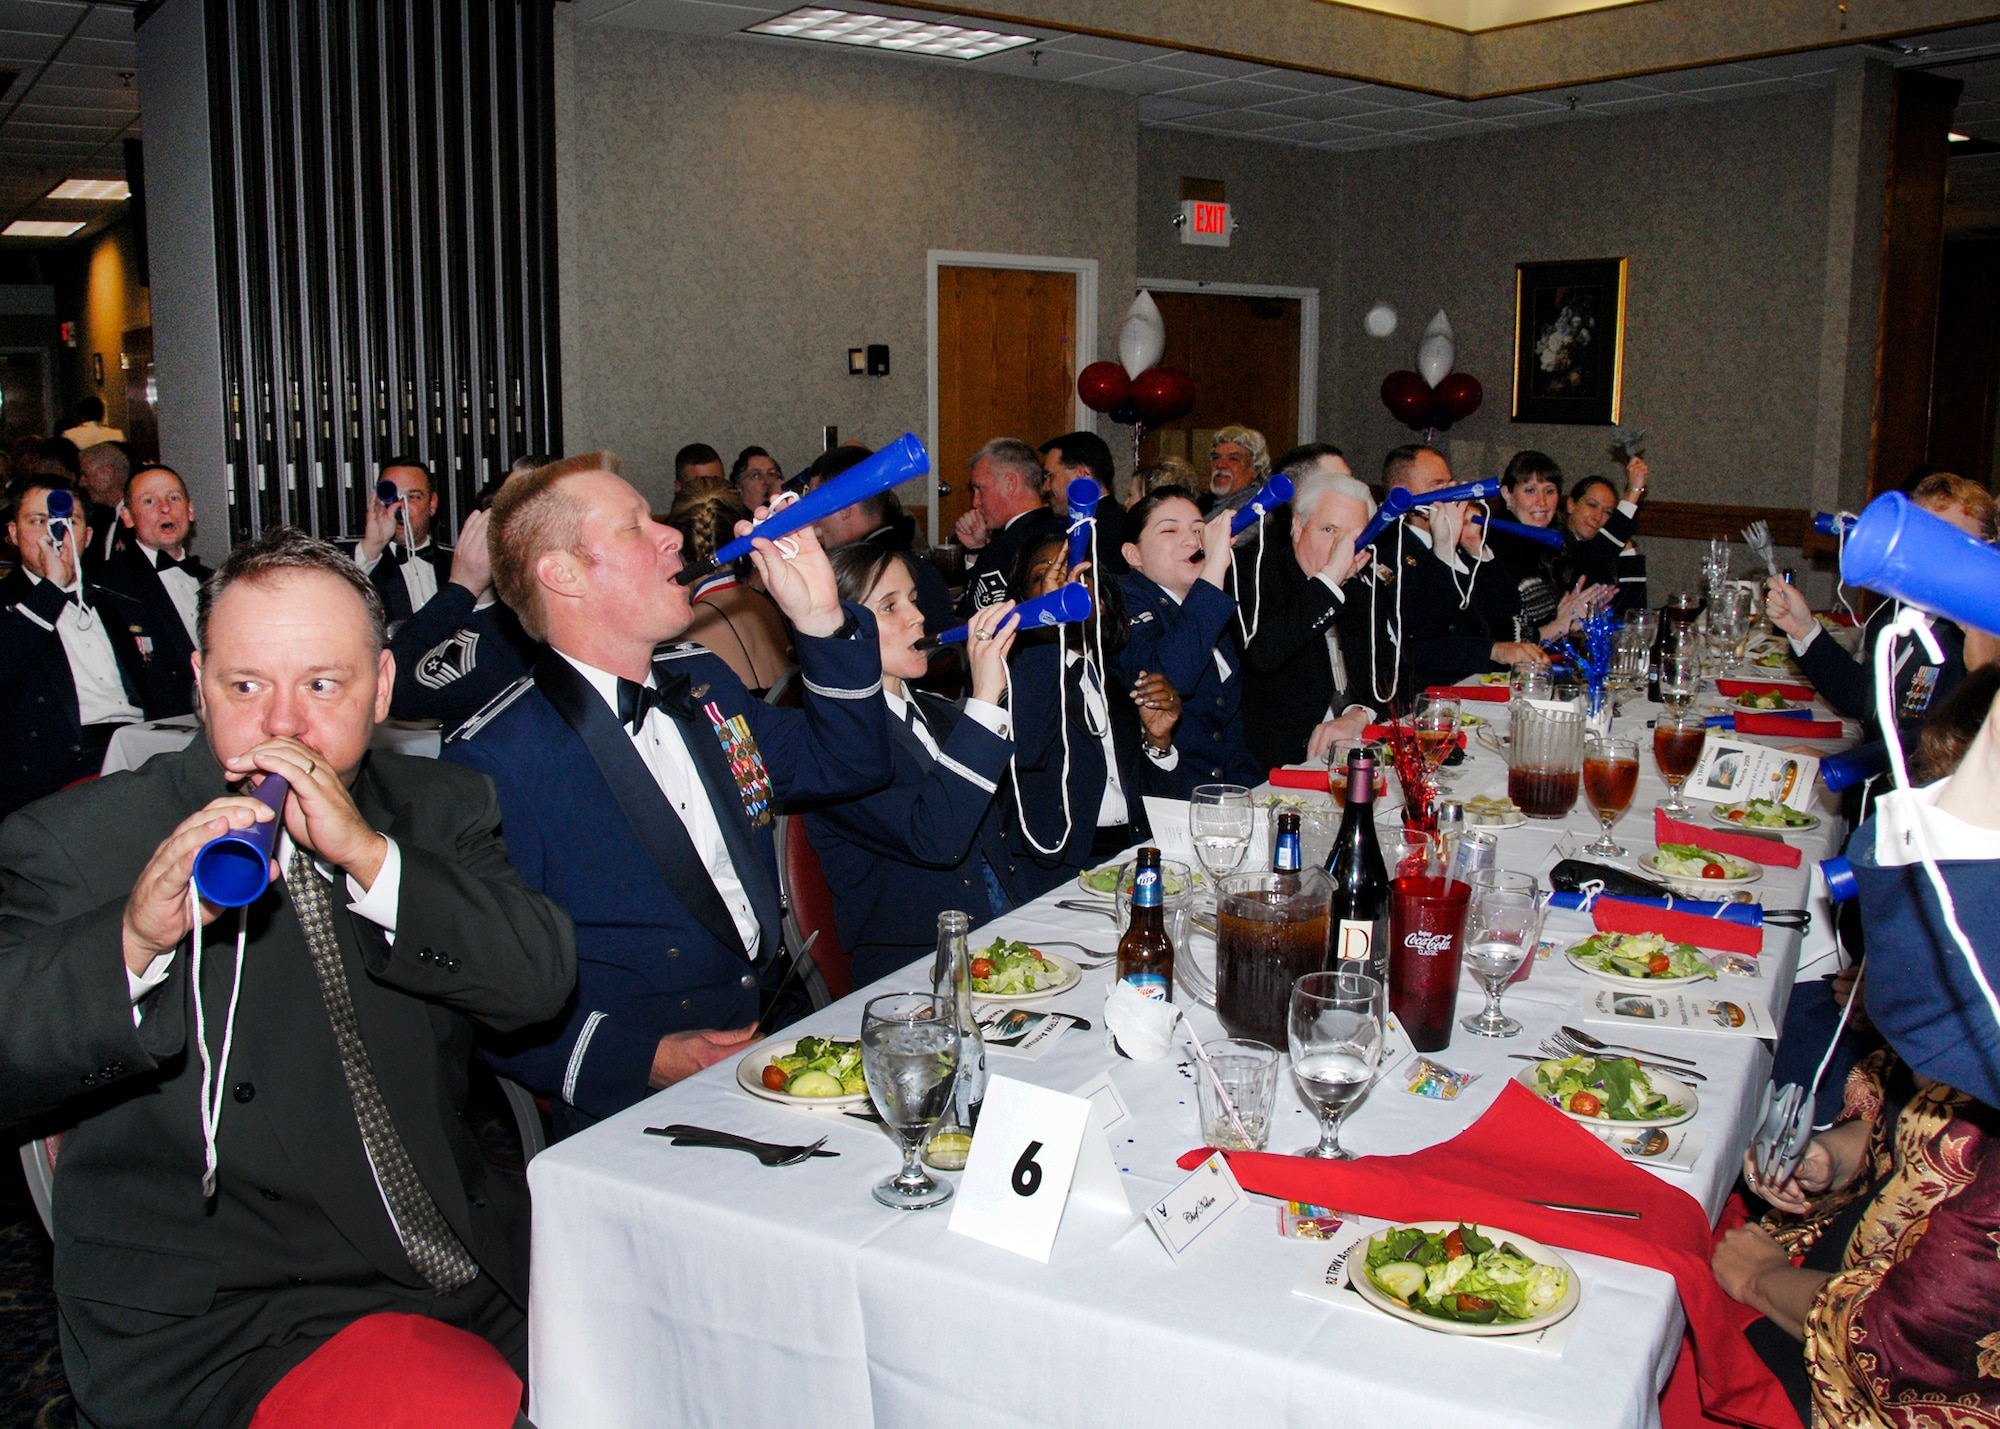 Team Sheppard celebrates the winners of 82nd Training Wing Annual Awards during a banquet March 5. Although only 14 of about 70 nominees were selected as the best in their perspective category, all of the wing's members were winners for contributing to the mission and accomplishing the 78,000 graduates in more than 100 specialties at more than 50 different locations around the world in 2009. (U.S. Air Force photo/Harry Tonemah) 